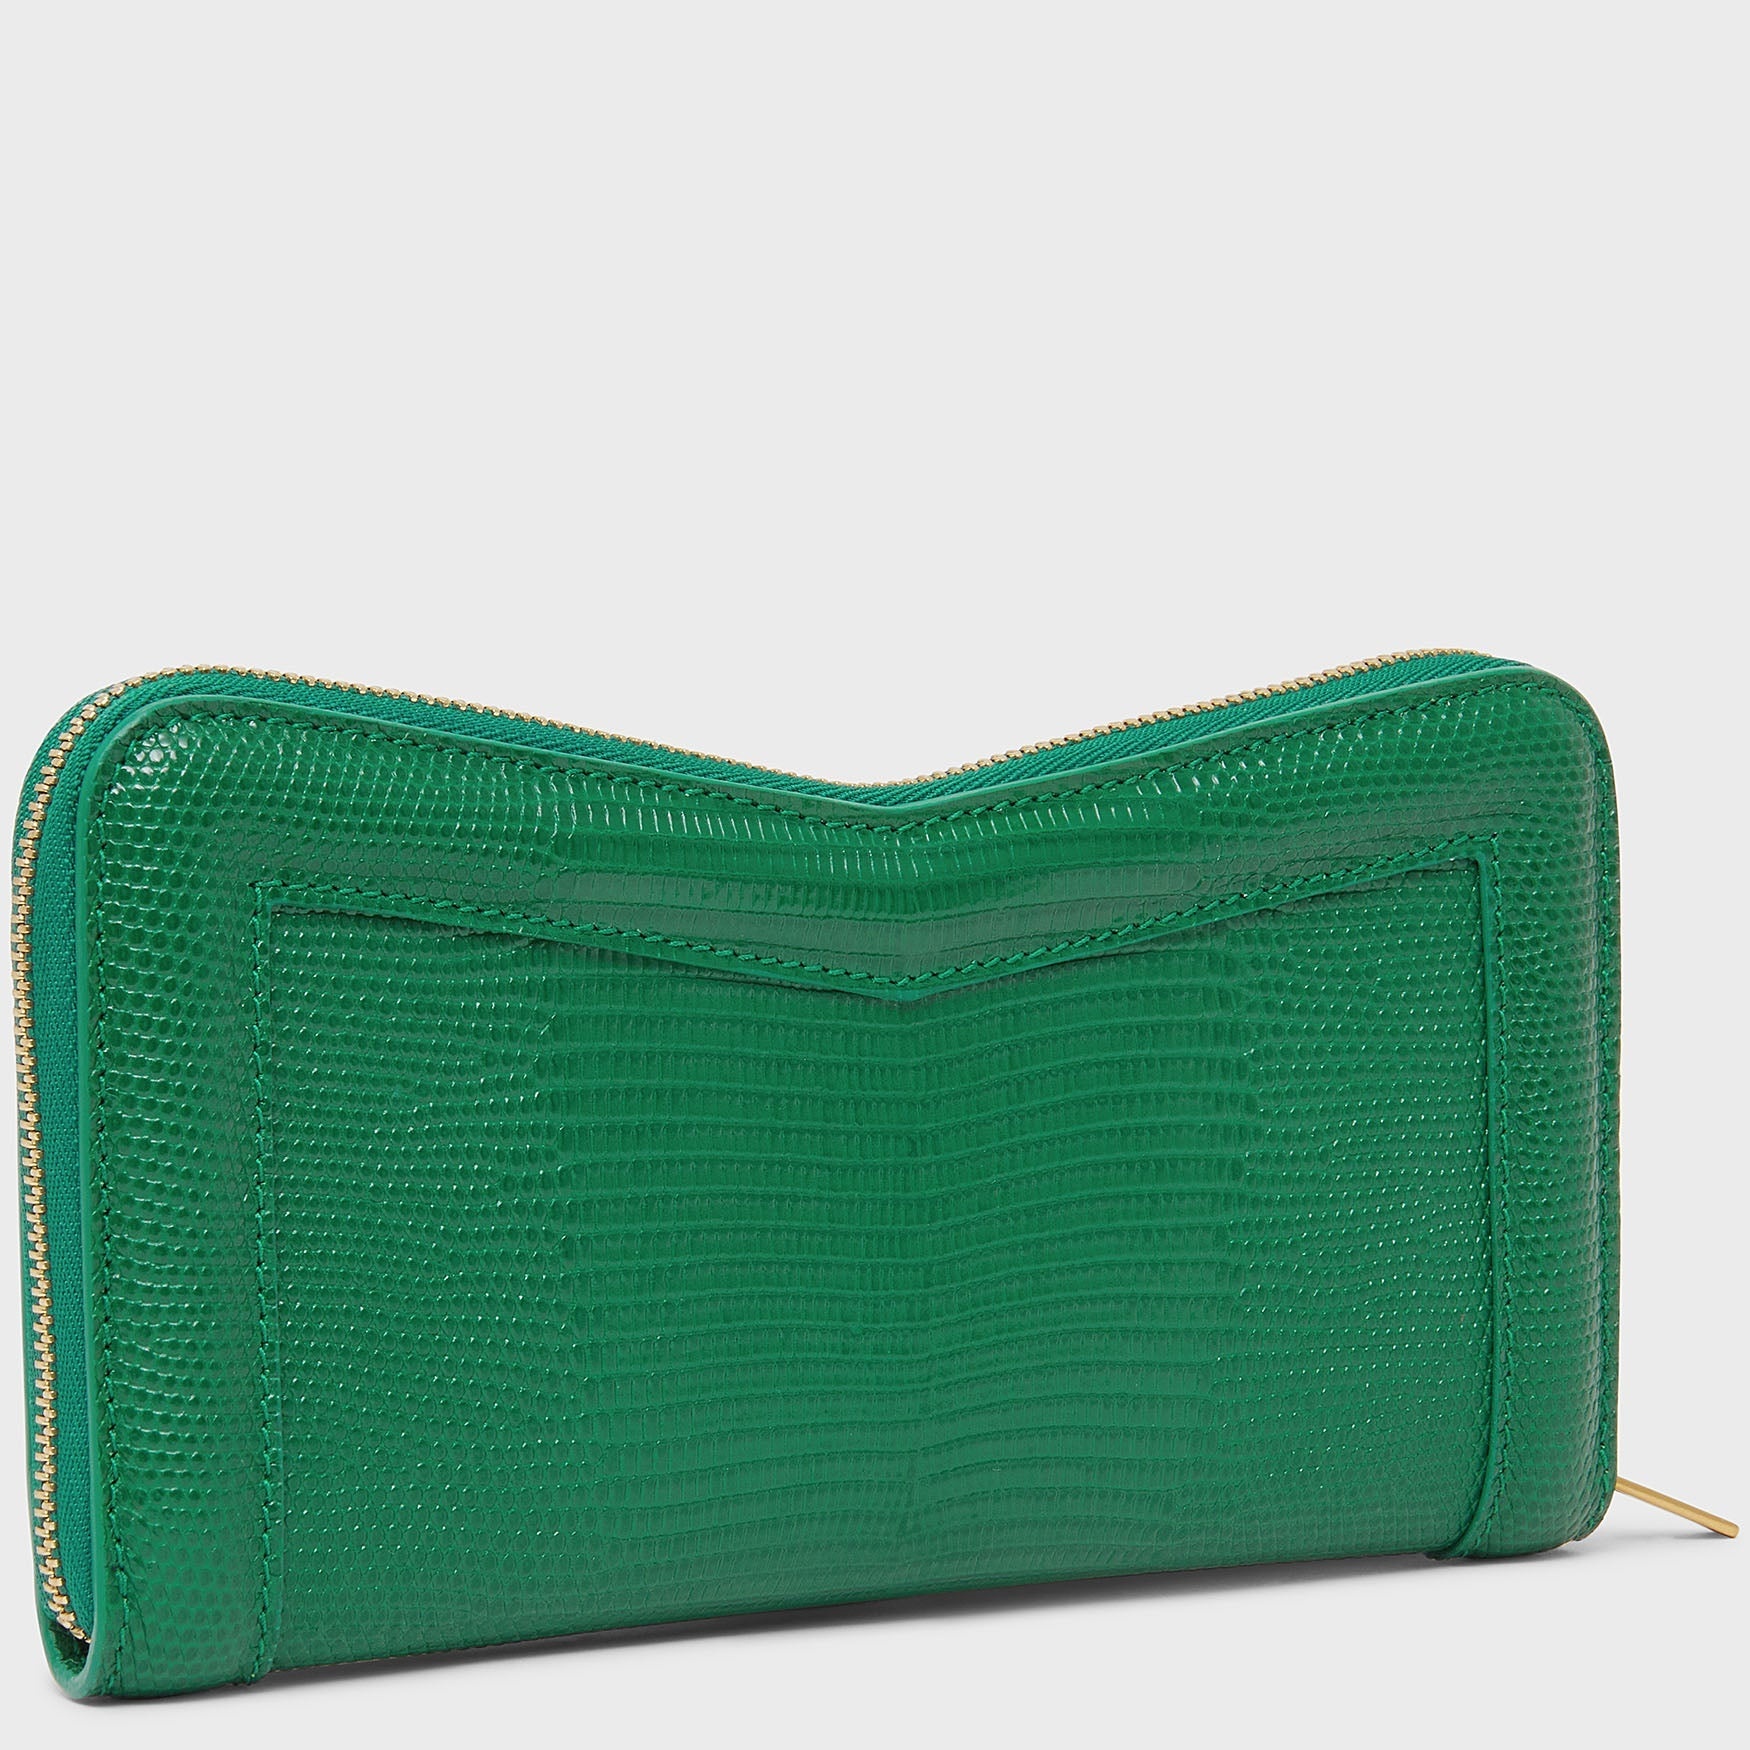 M CONTINENTAL WALLET - 5